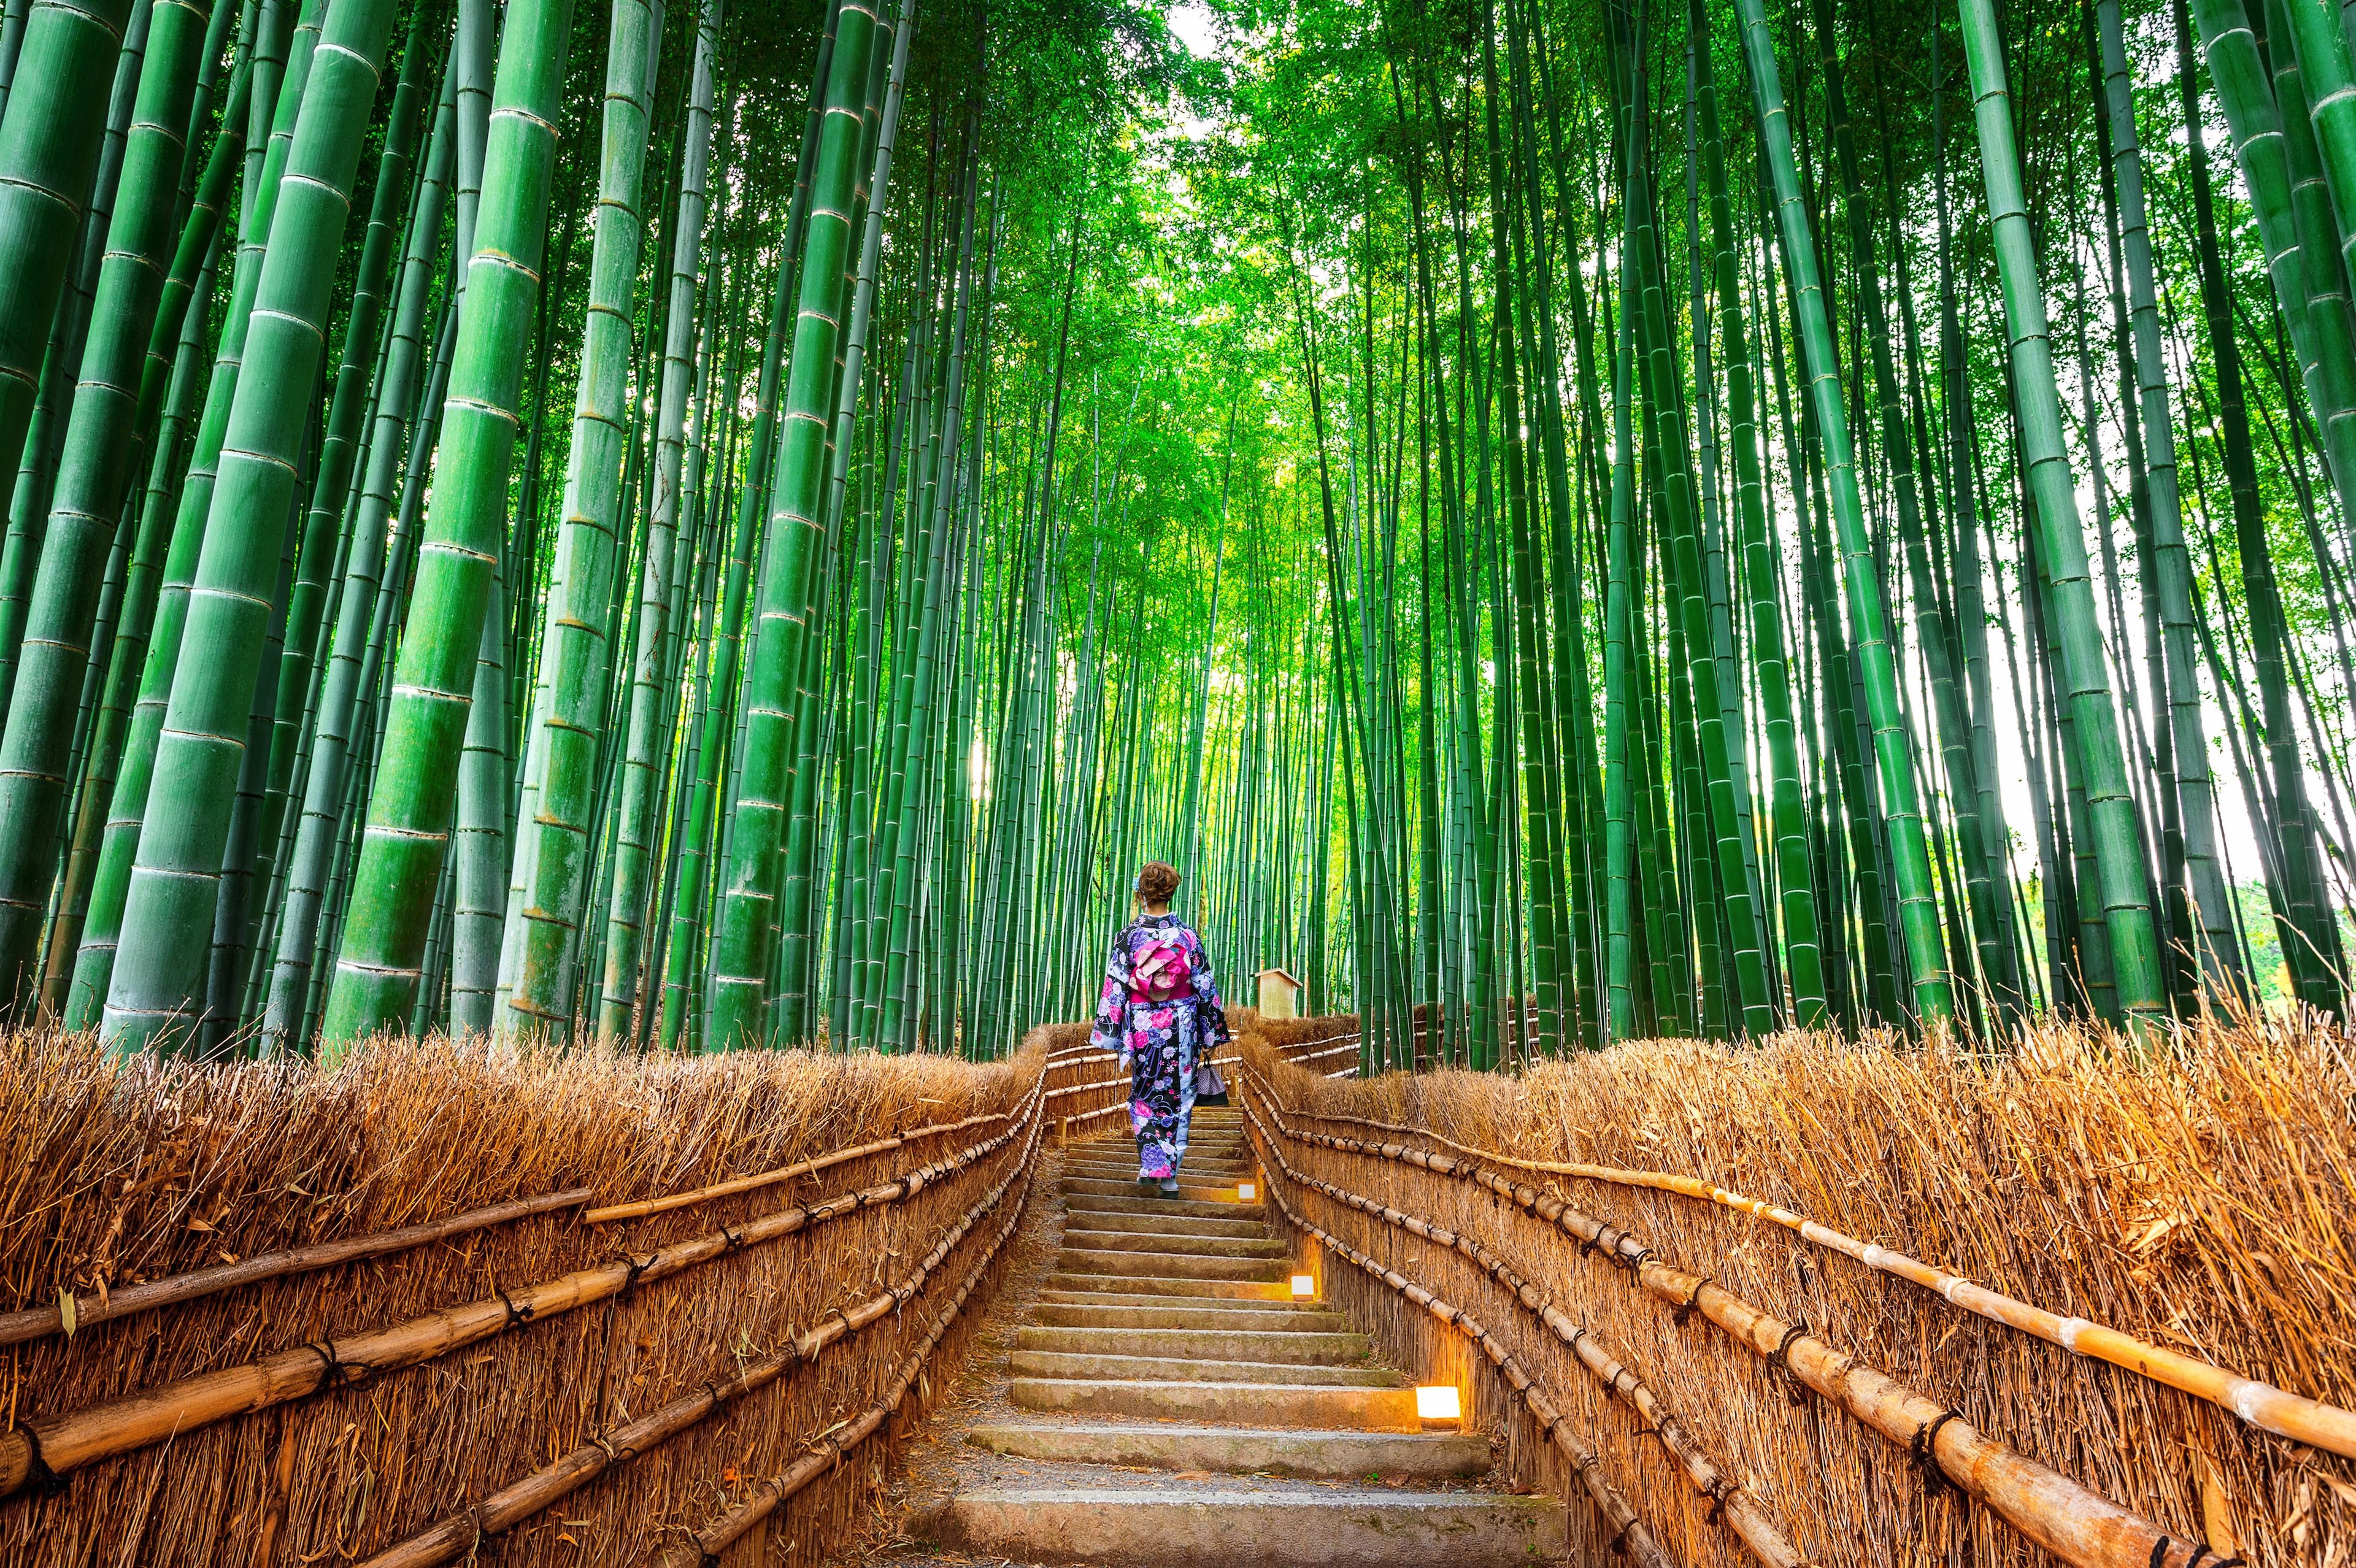 All You Need to Know about the Arashiyama Bamboo Forest in Kyoto, Japan